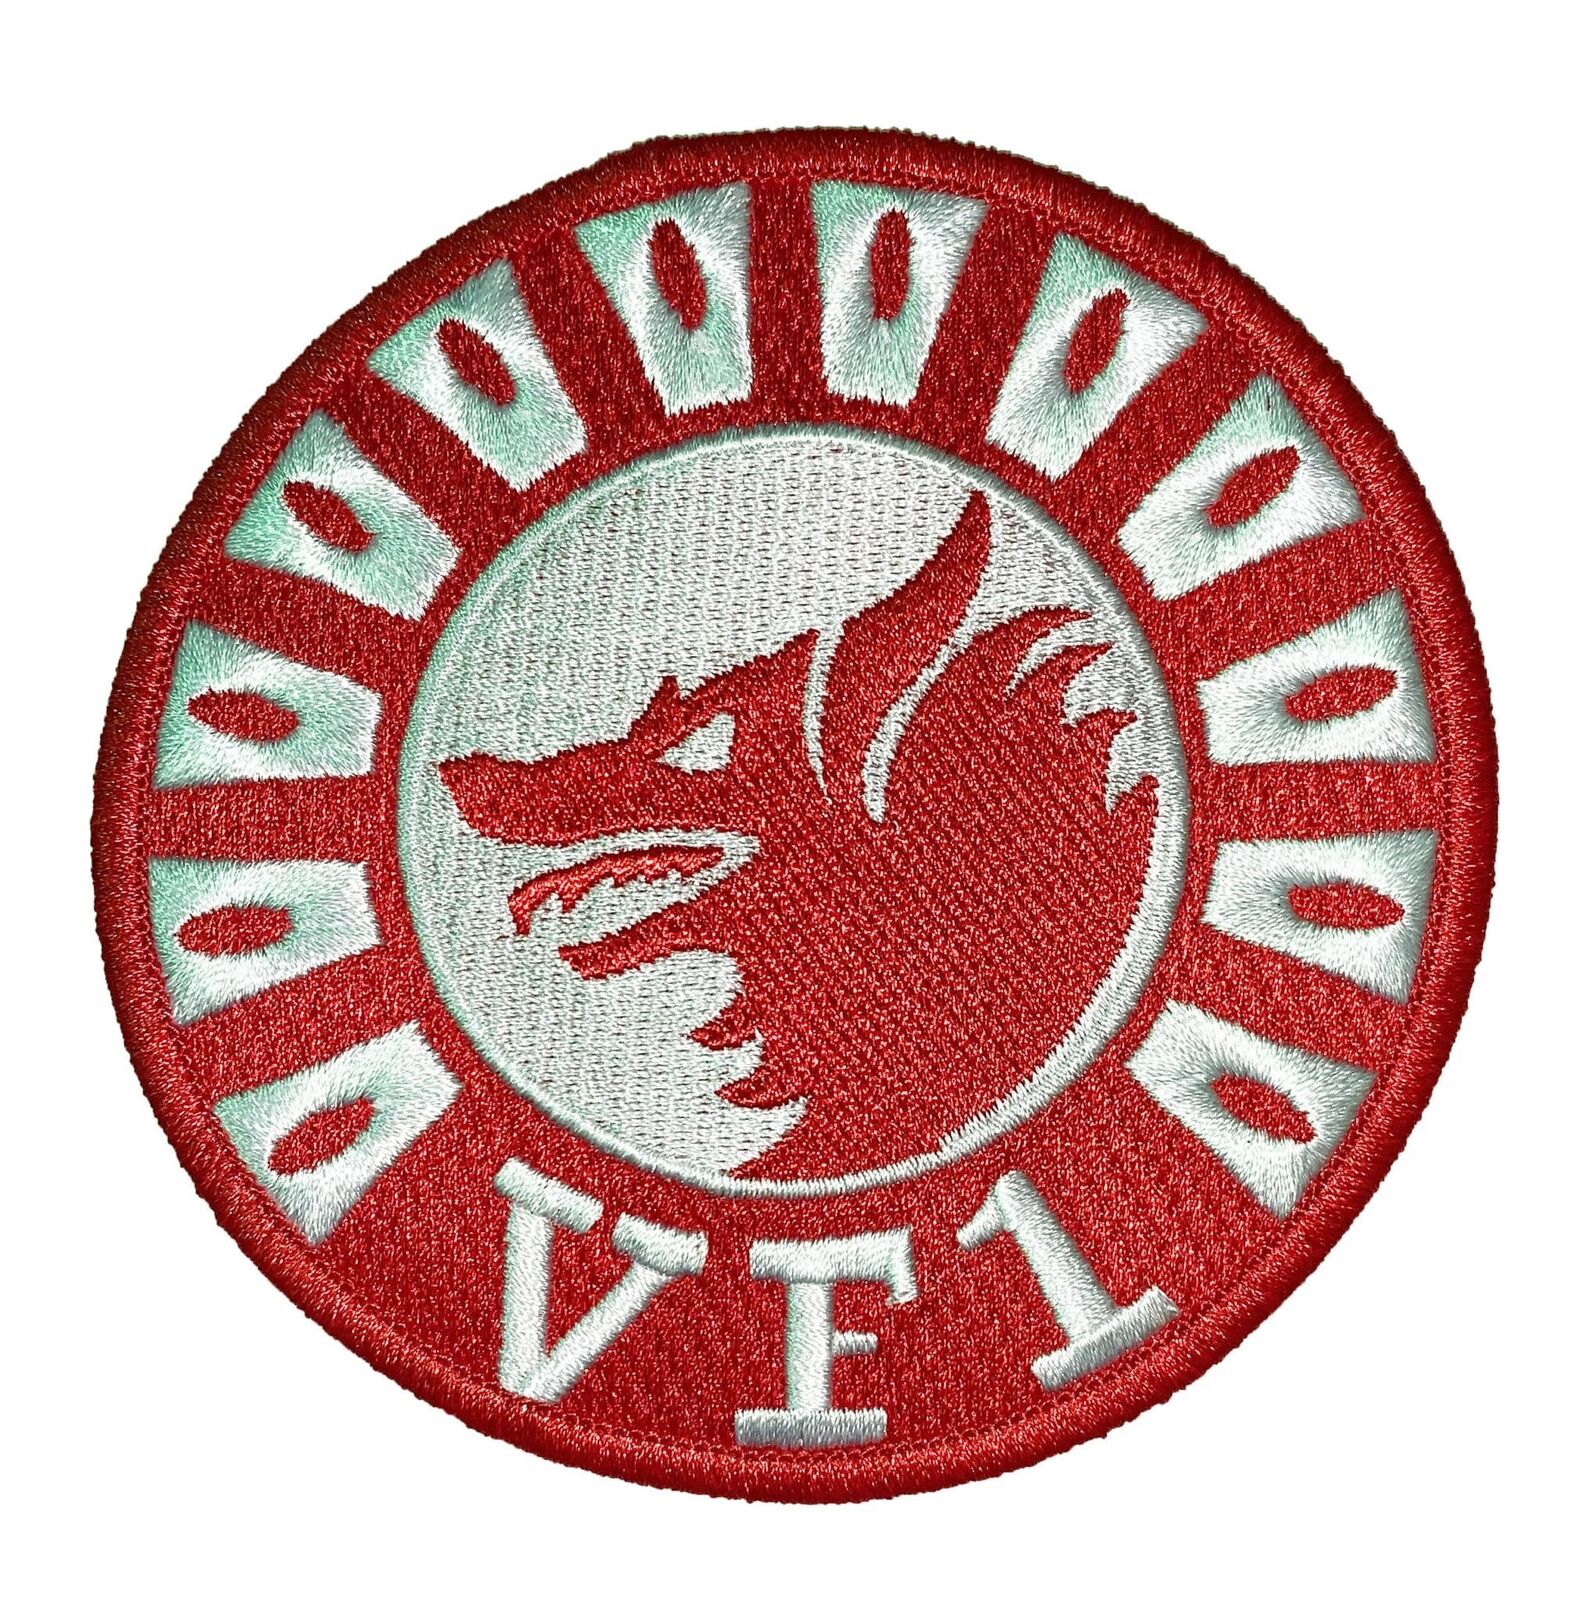 VF-1 Wolfpack Squadron Patch – Sew On, 4